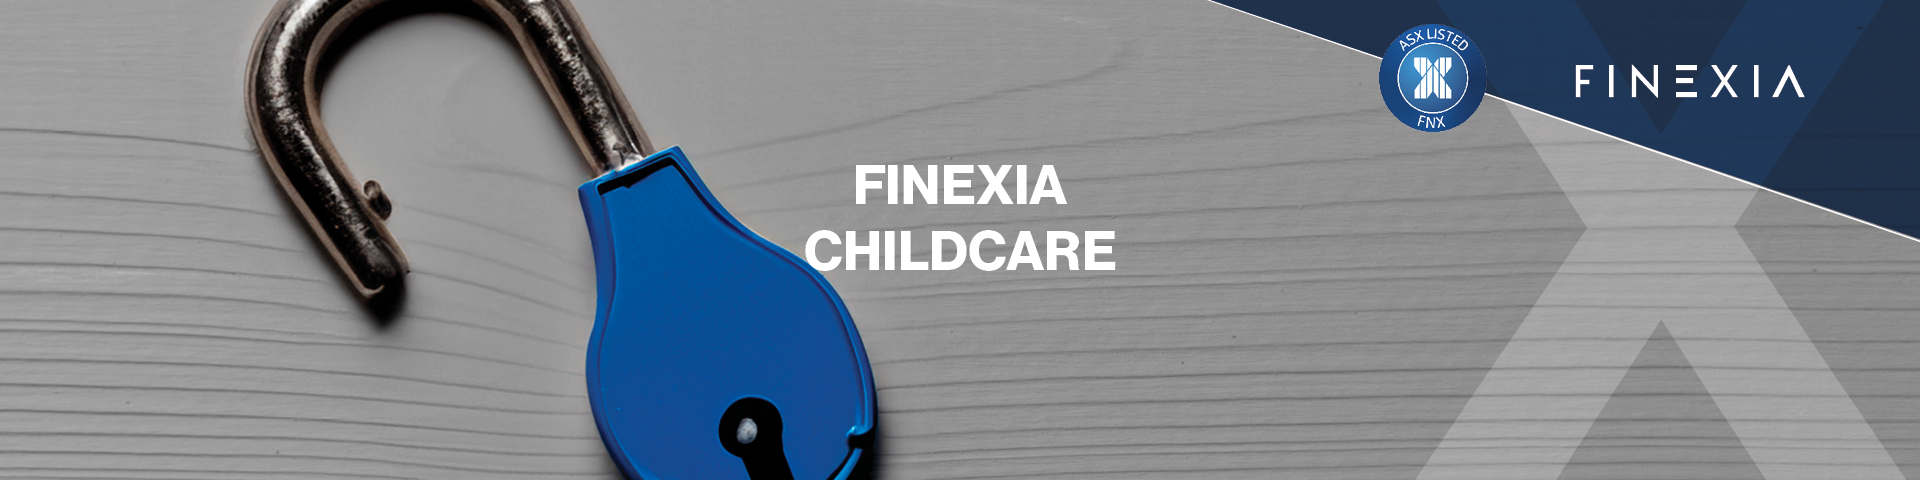 Unlocking the Door to Your Childcare Center with Finexia